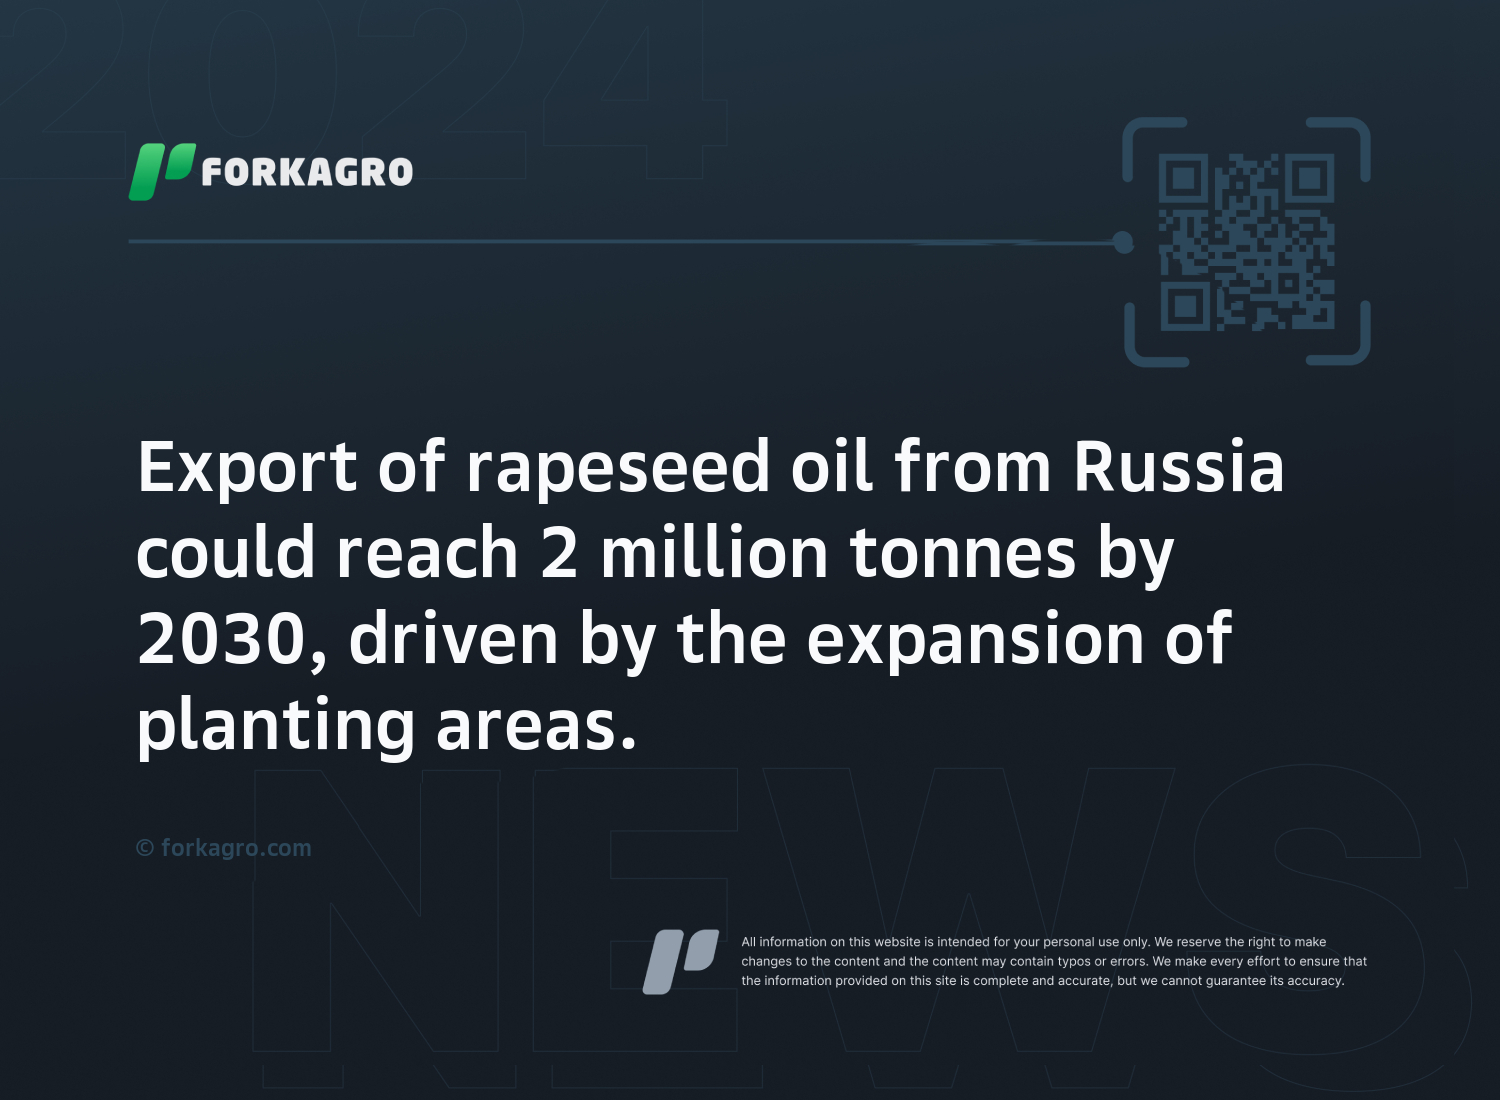 Export of rapeseed oil from Russia could reach 2 million tonnes by 2030, driven by the expansion of planting areas.